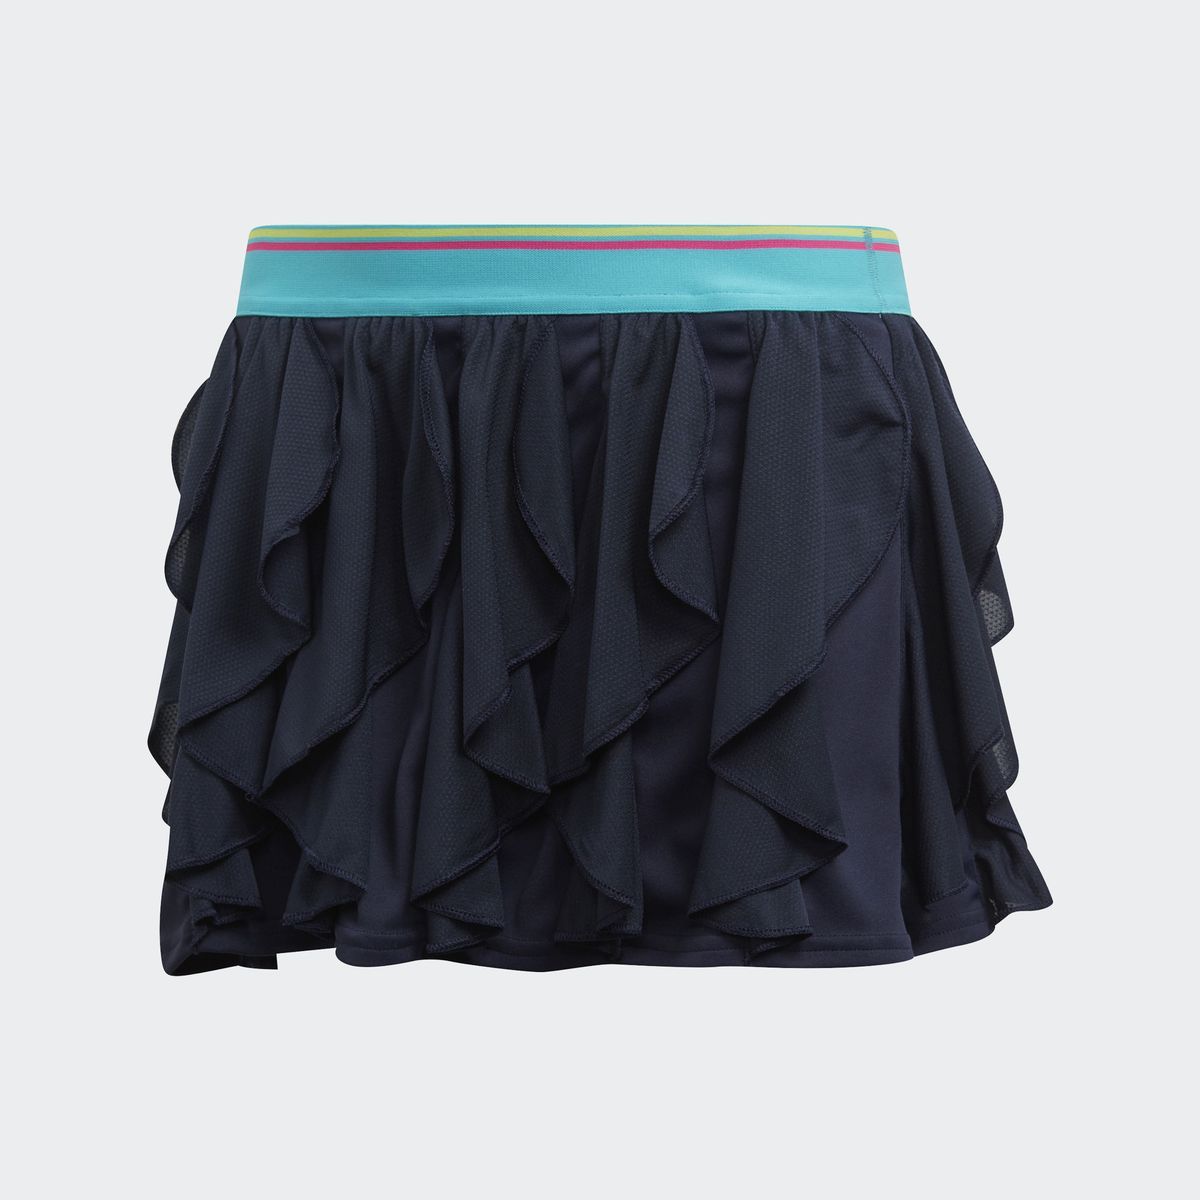    Adidas G Frilly Skirt, : . DH2807.  152